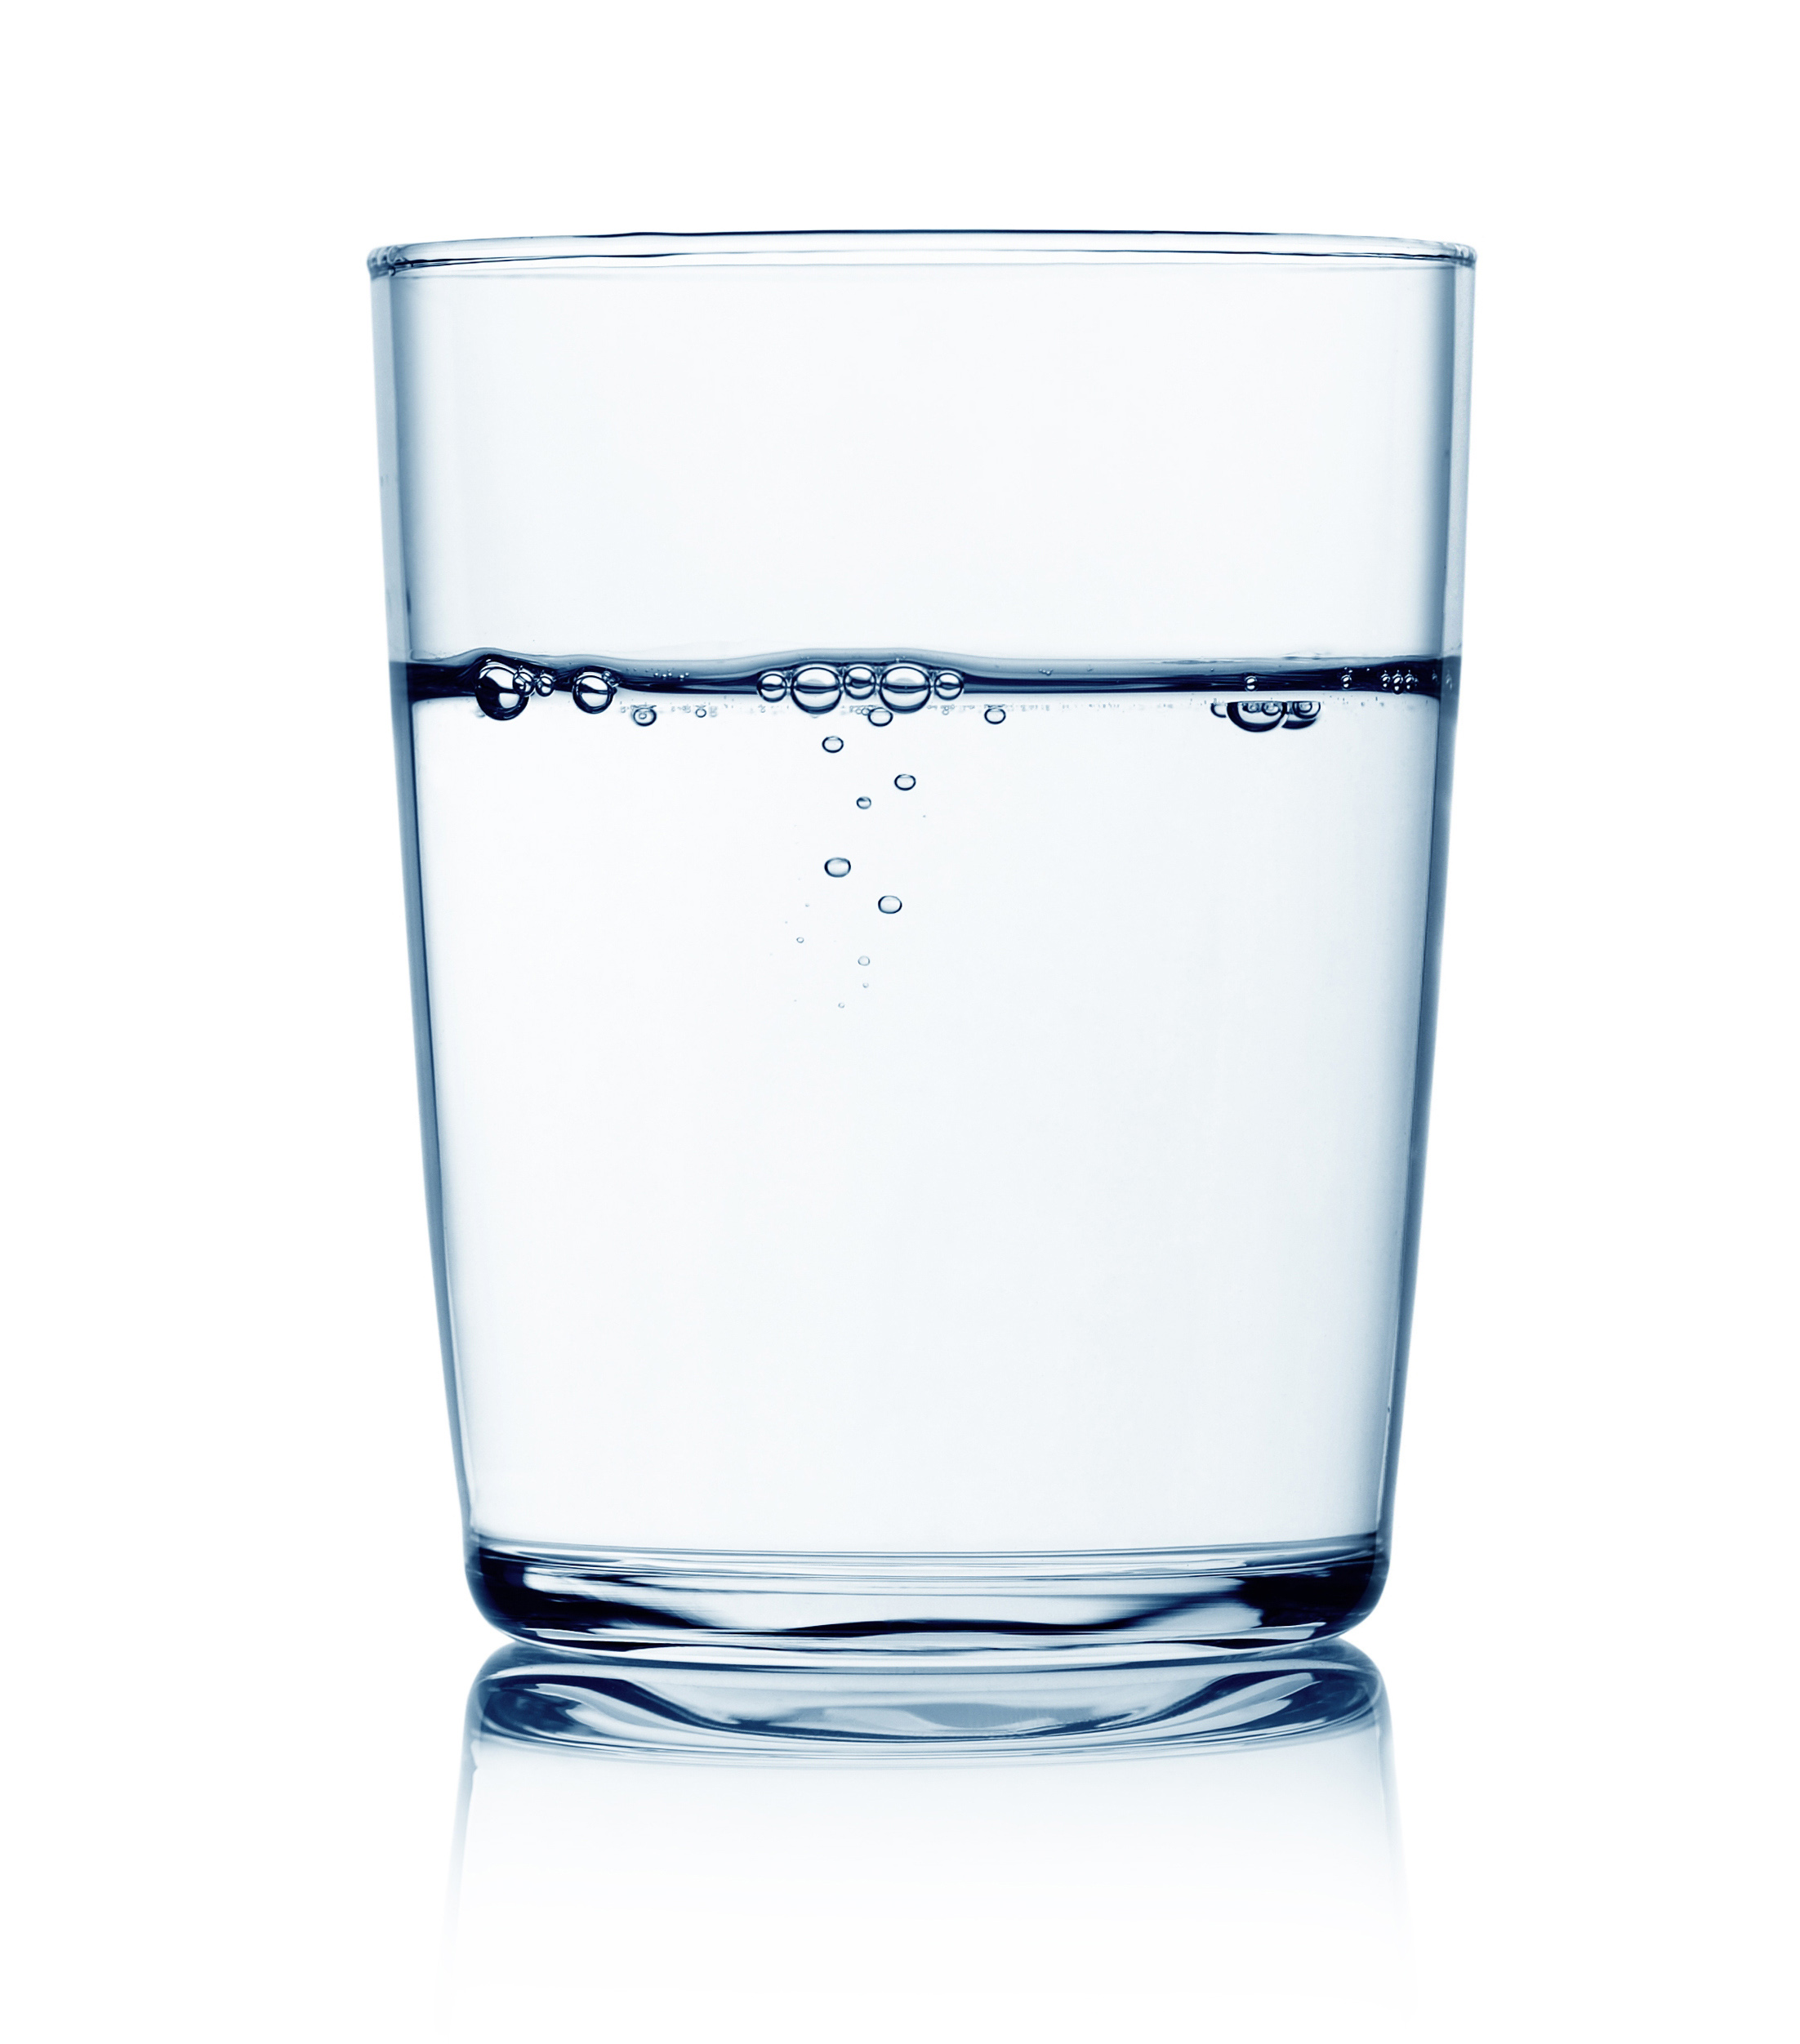 A photo of a glass of water